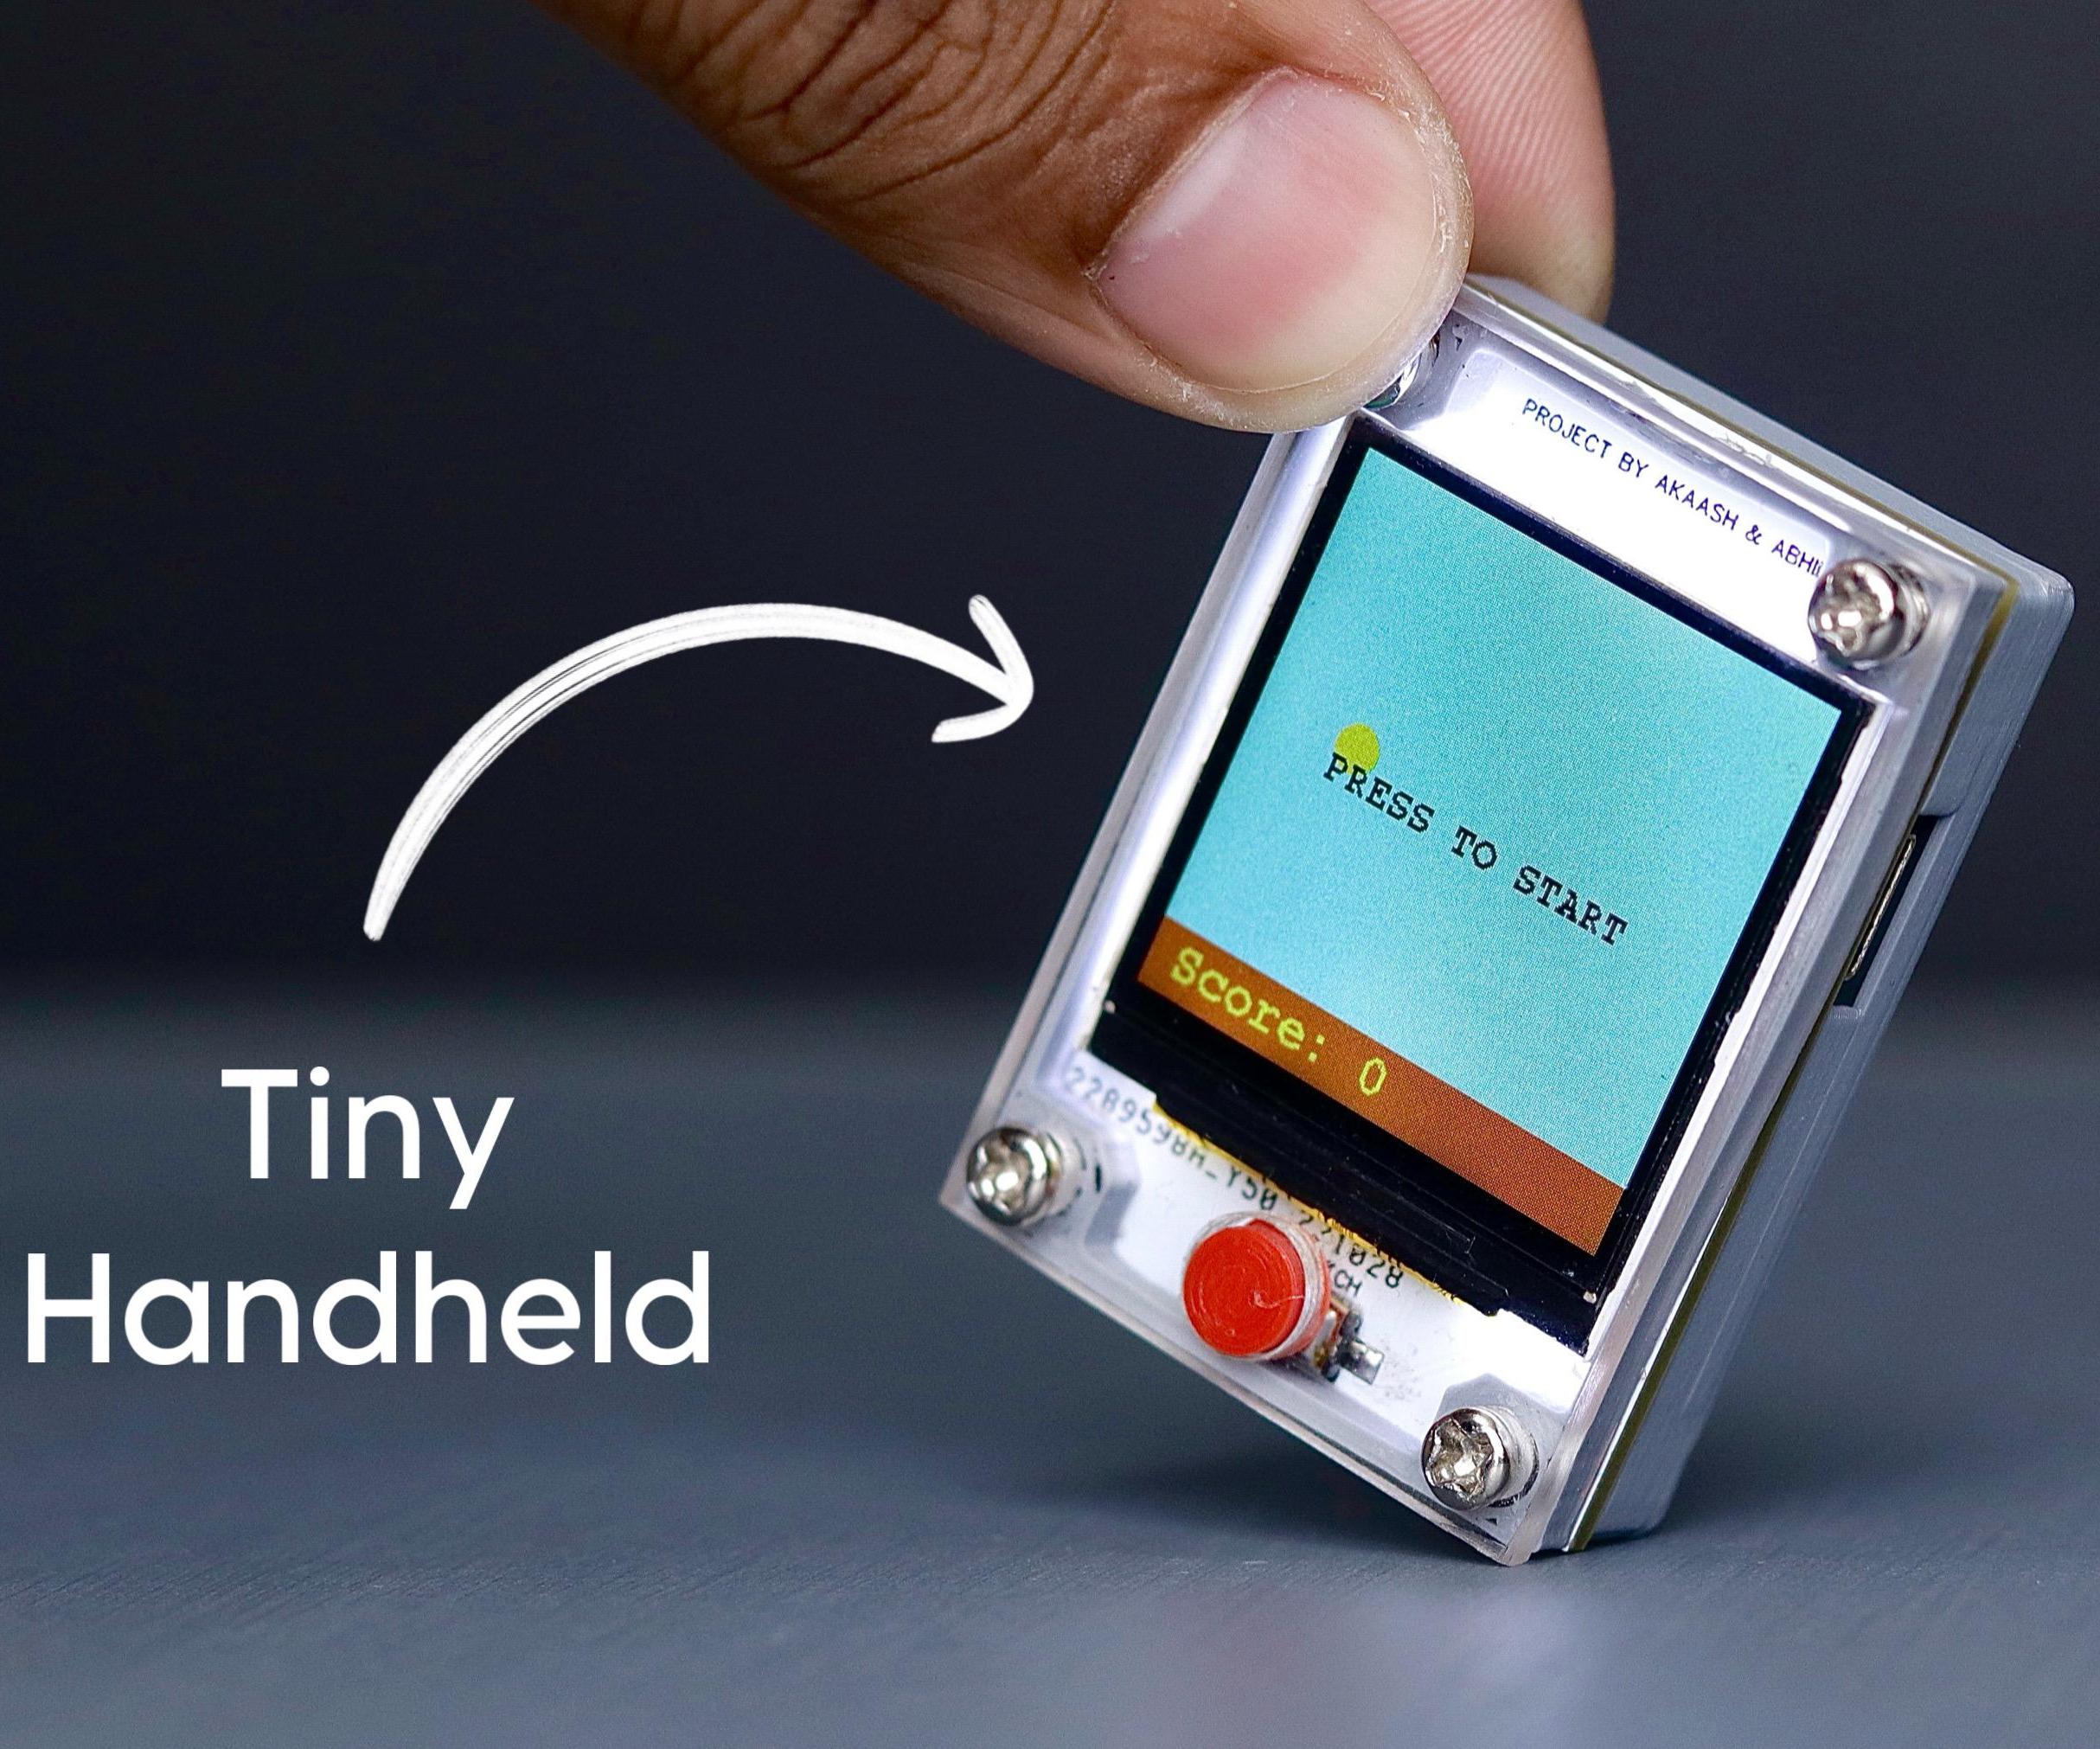 Making a Tiny Handheld Game With Arduino